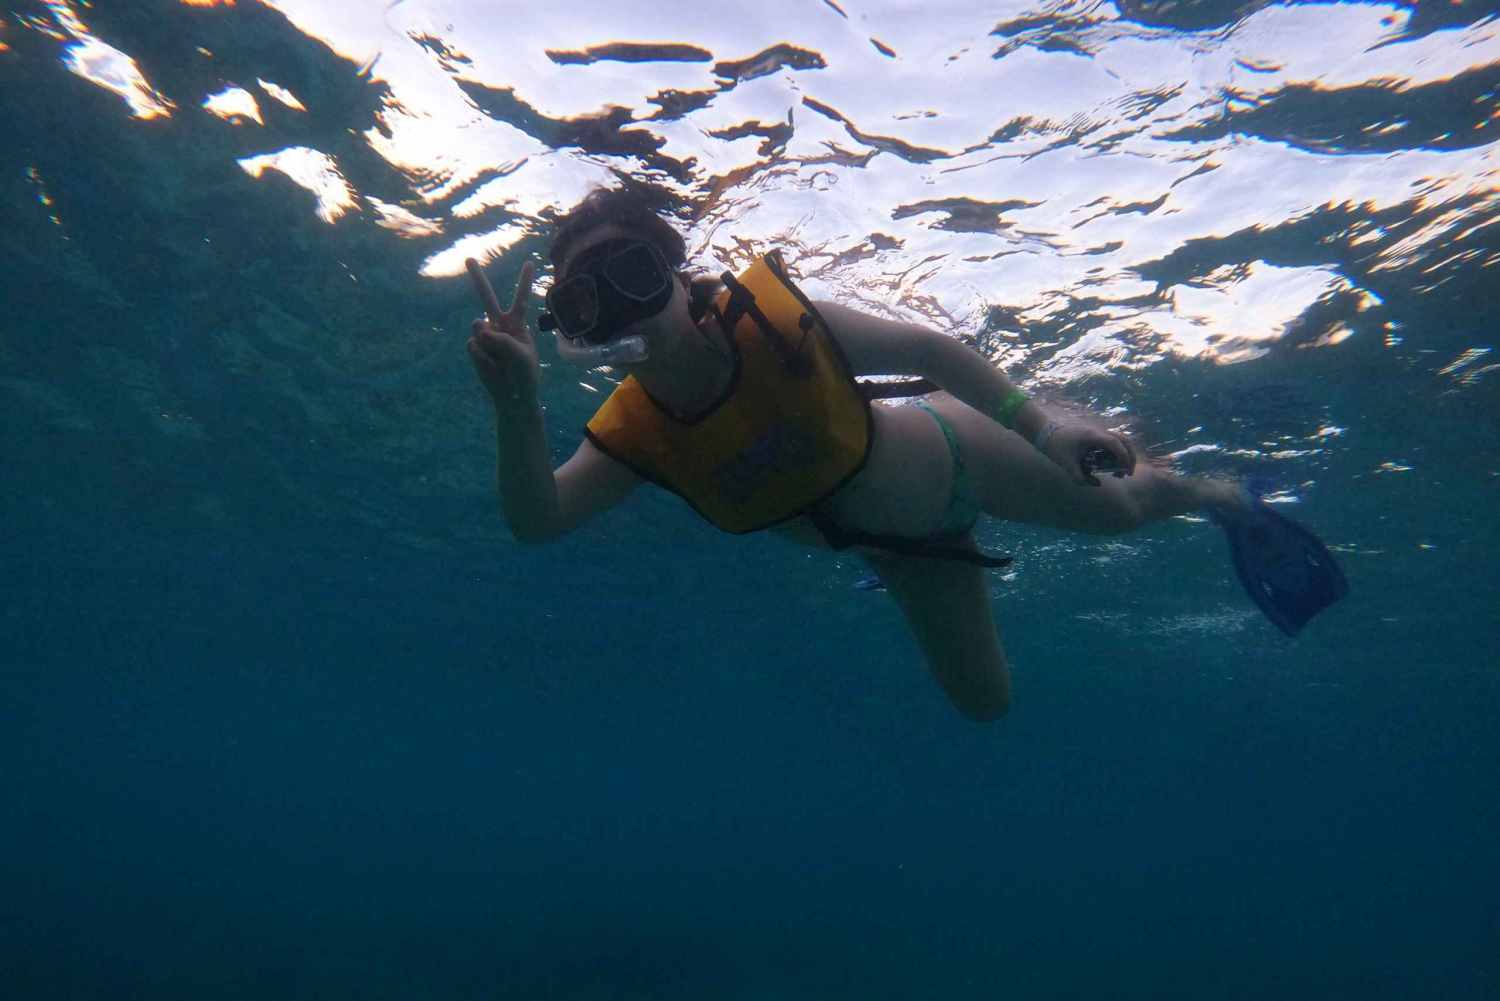 Cancun: Sunrise Snorkeling Tour with 5 Stops and Pickup